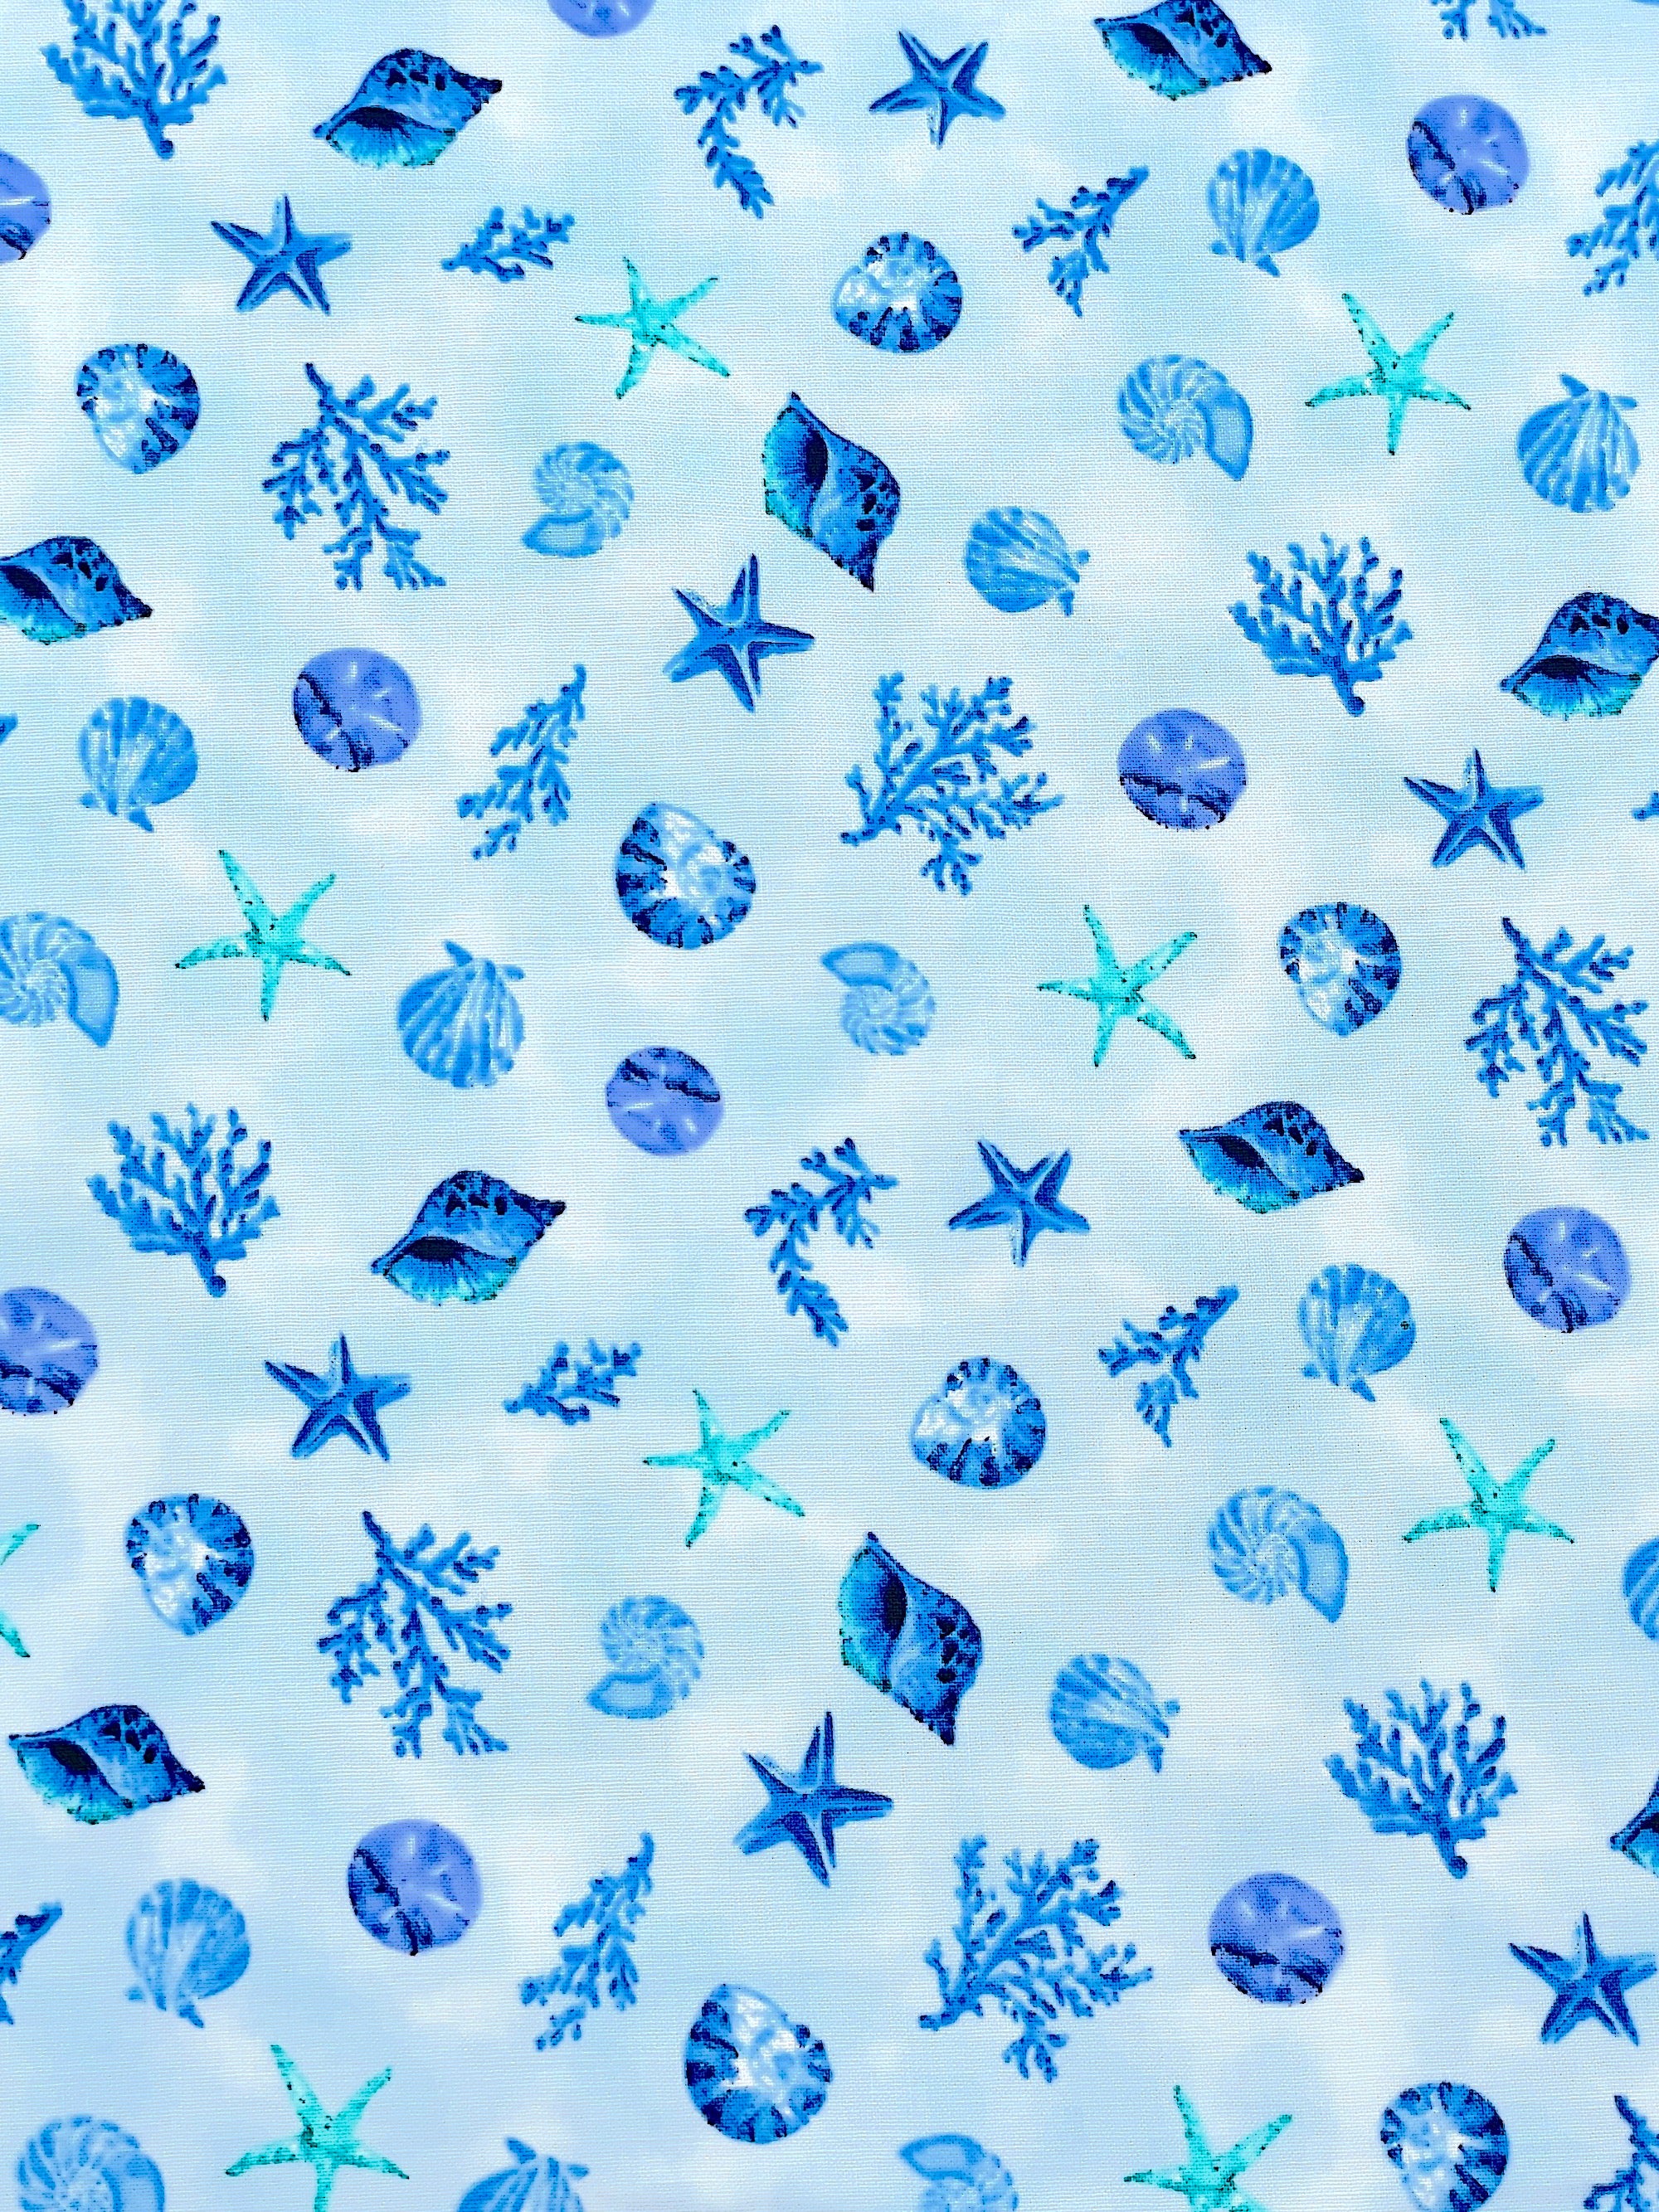 This cotton fabric is part of The Sea is Calling collection.&nbsp; This fabric is covered with starfish, coral, sea shells and more.